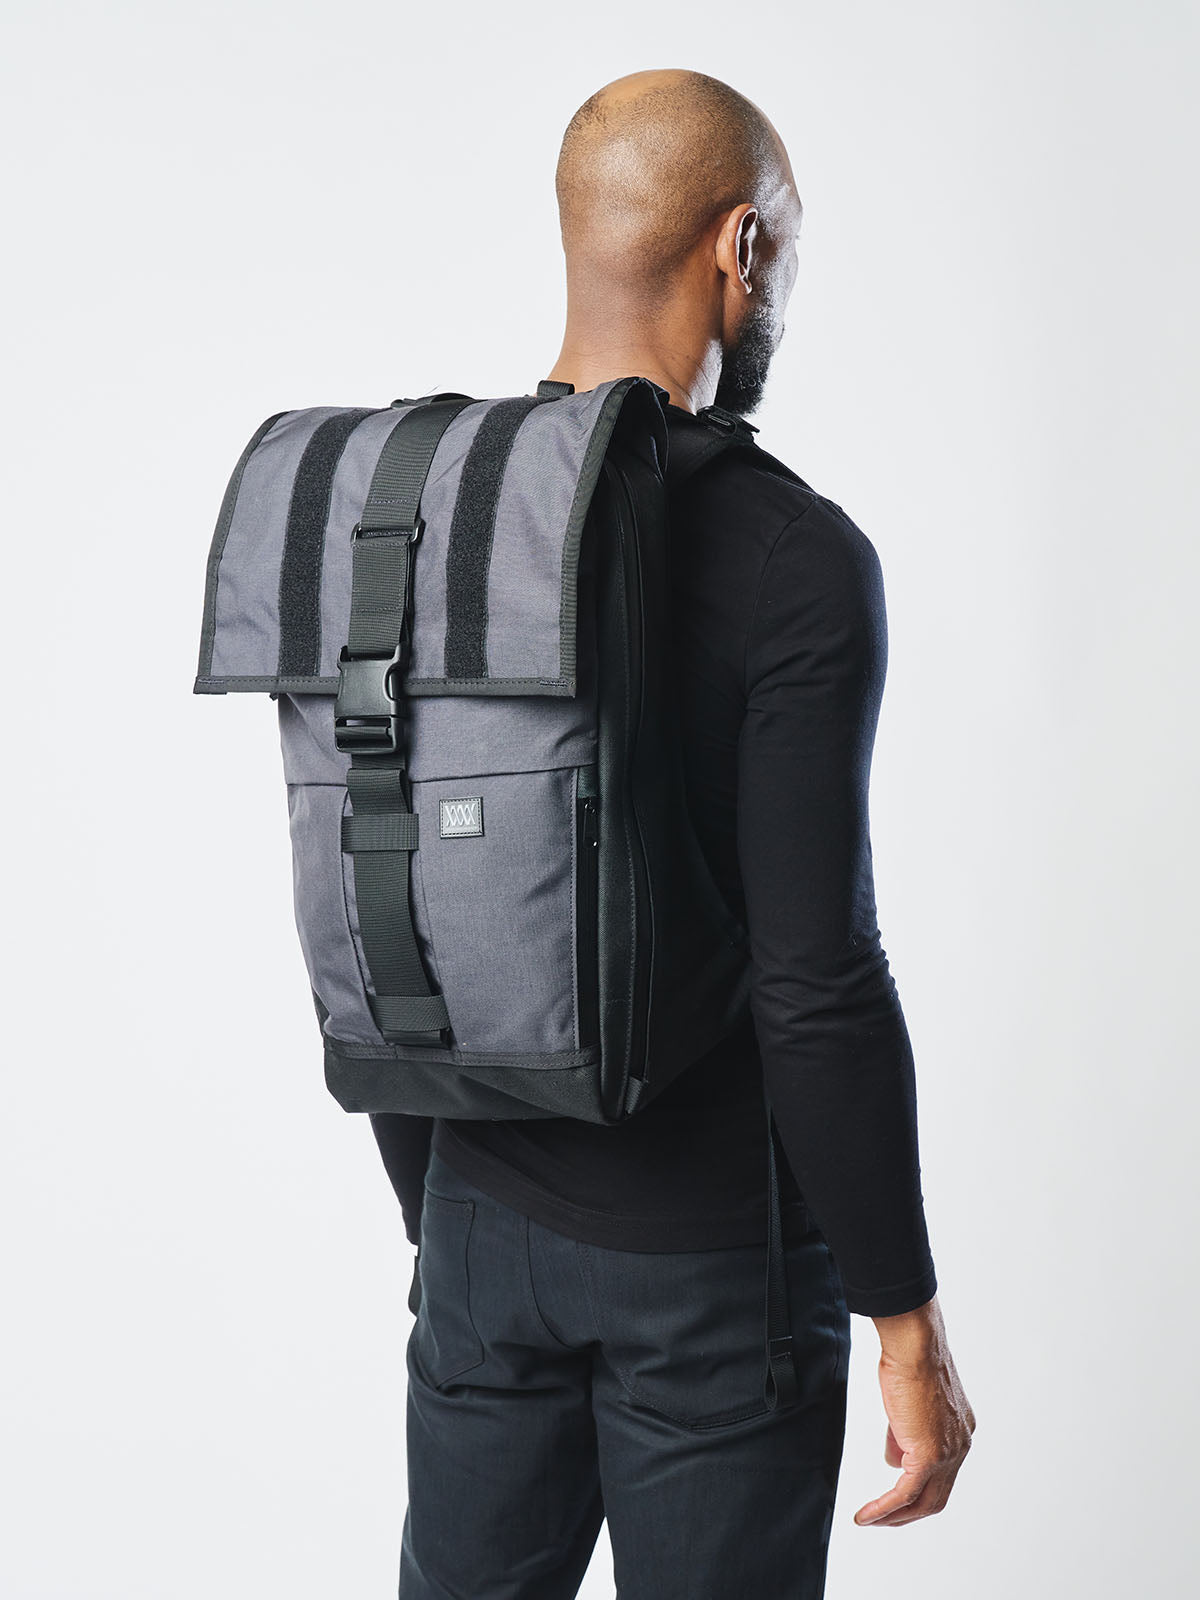 Rambler by Mission Workshop - Weatherproof Bags & Technical Apparel - San Francisco & Los Angeles - Built to endure - Guaranteed forever